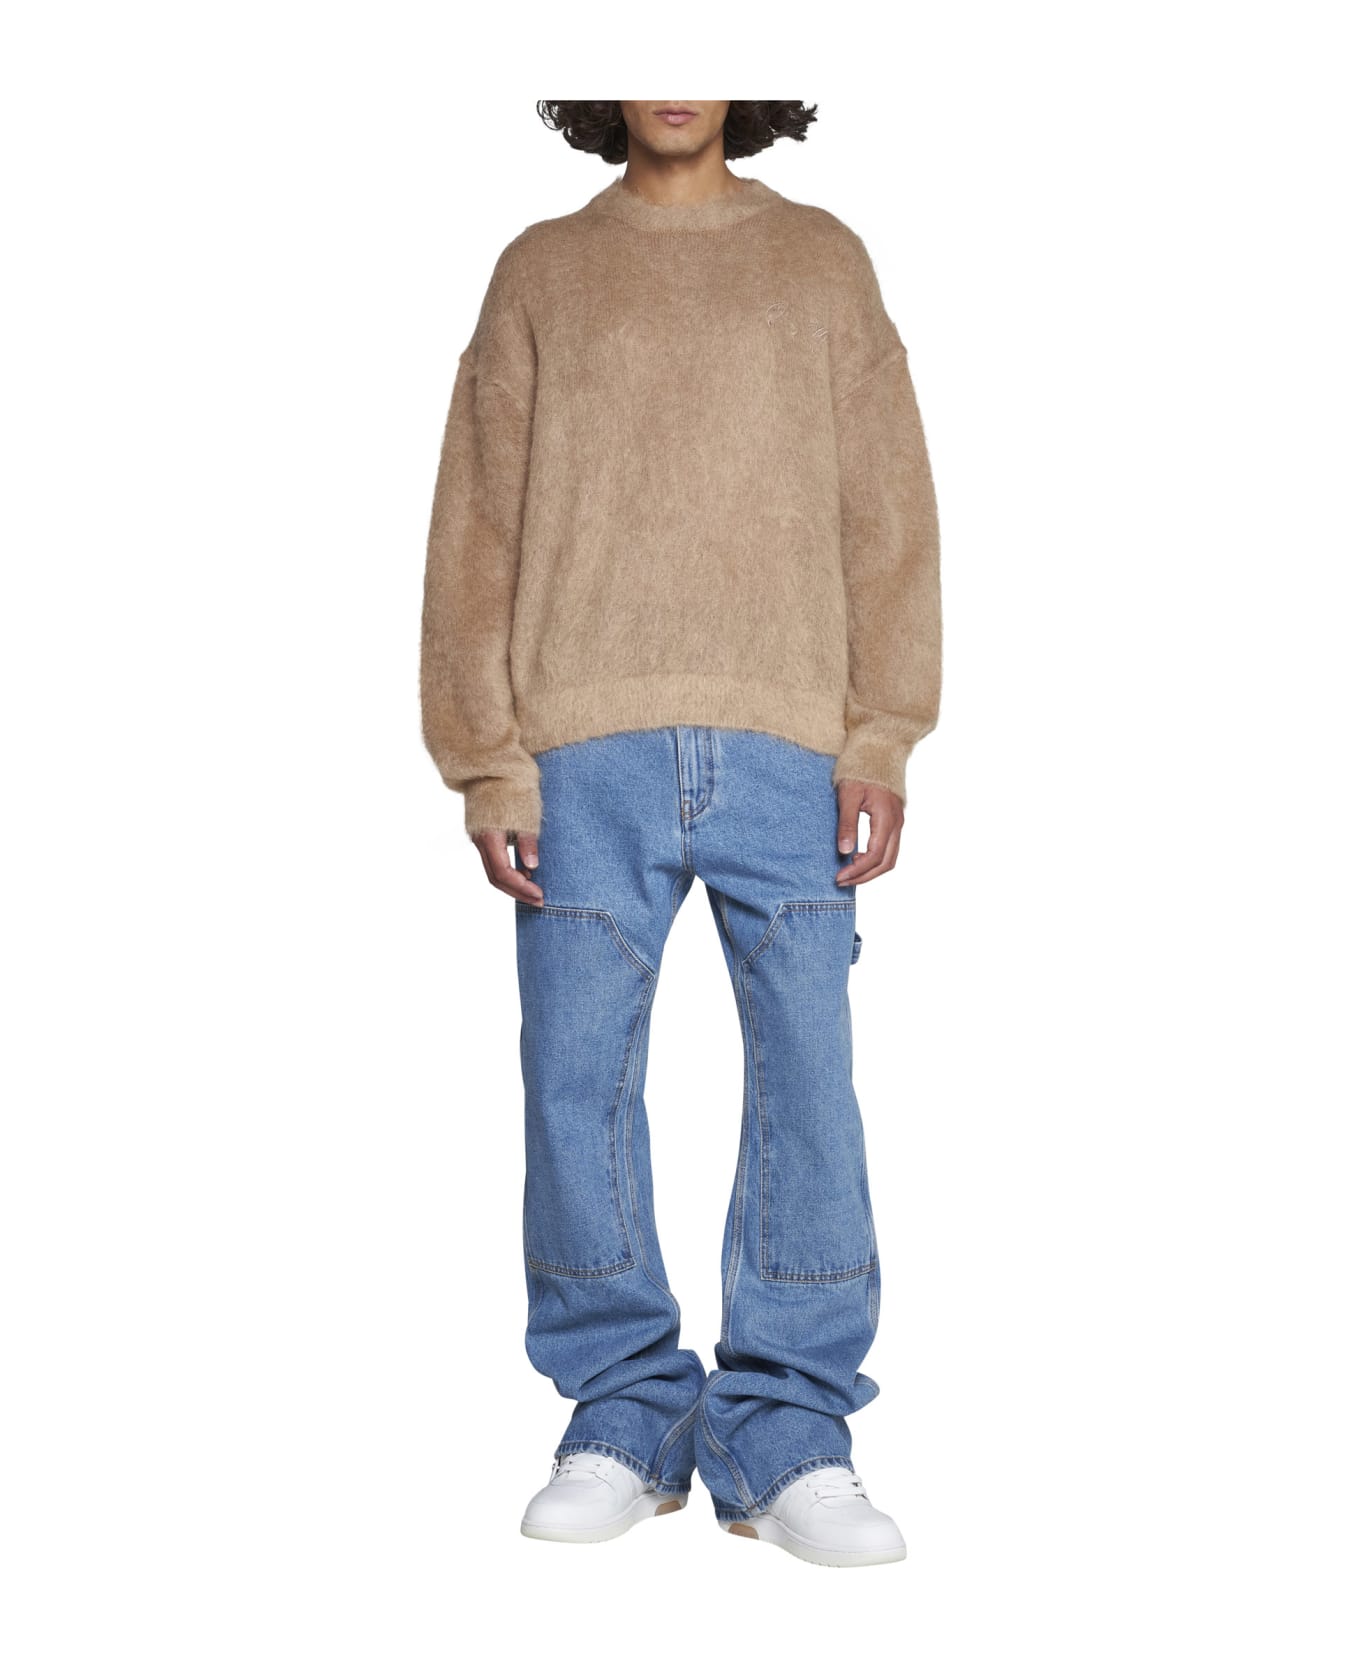 Off-White Sweater - Camel